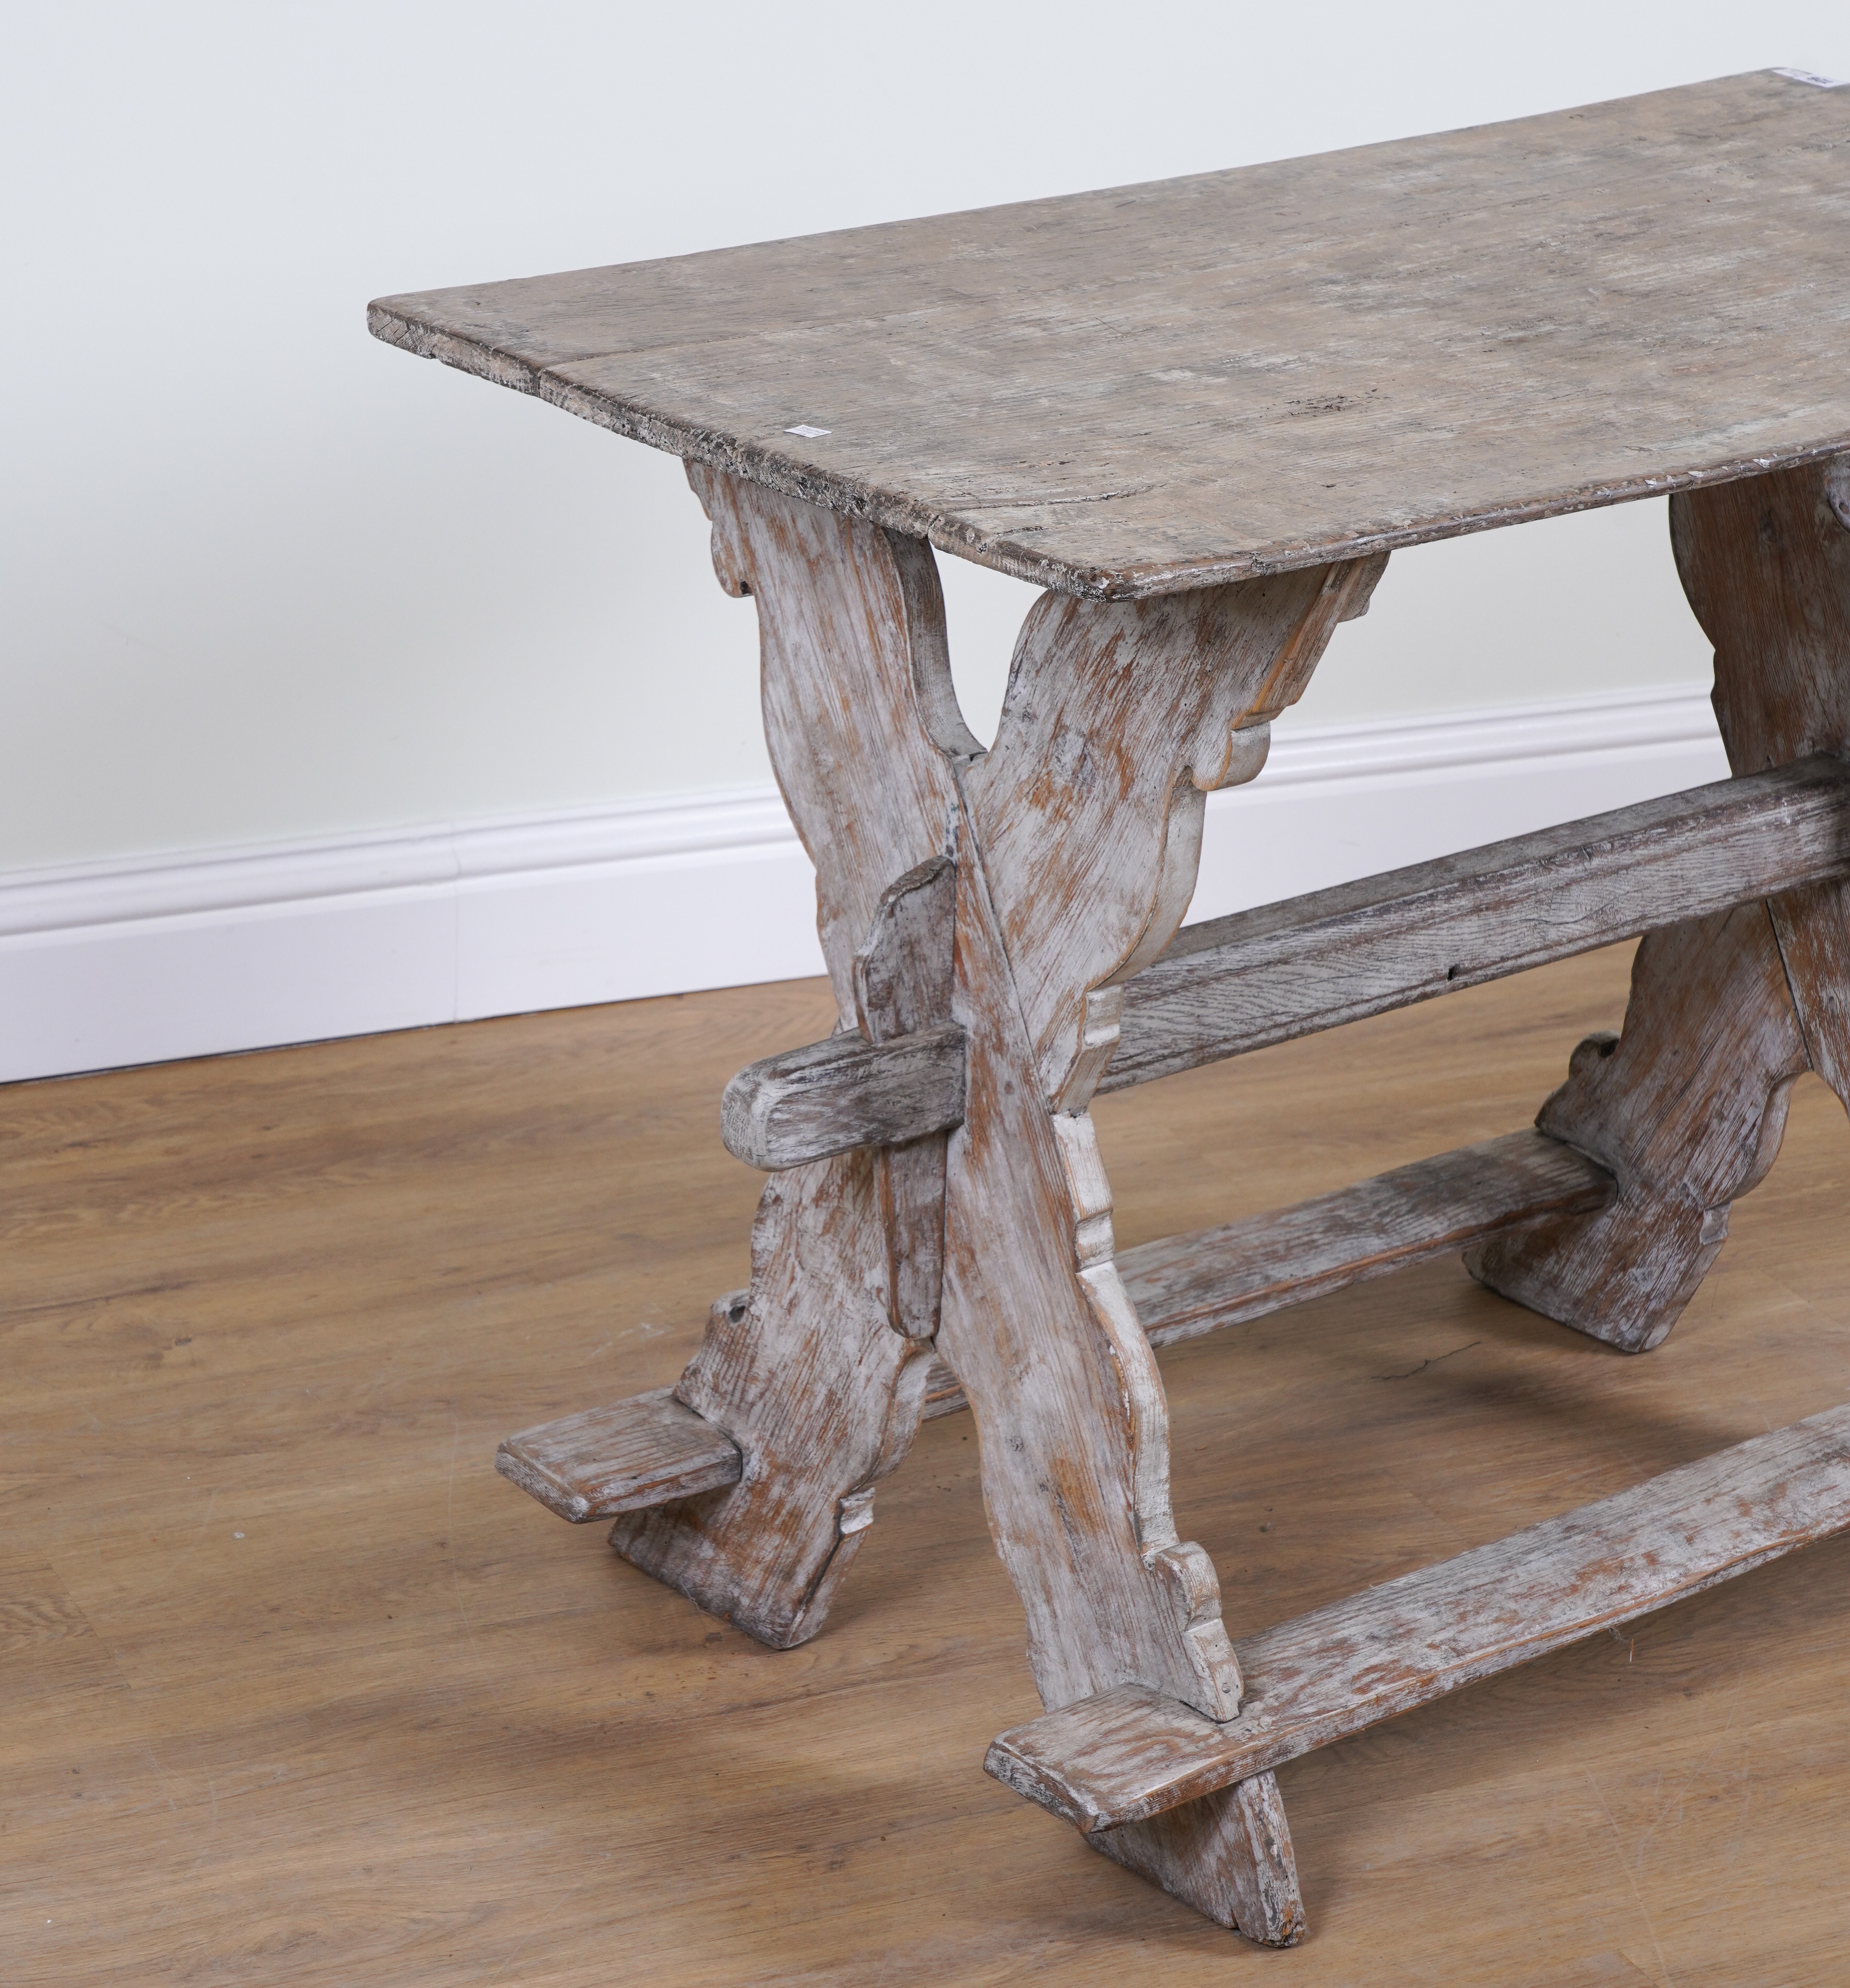 A CONTINENTAL GUSTAVIAN STYLE PAINTED OAK SMALL TAVERN TABLE - Image 3 of 3